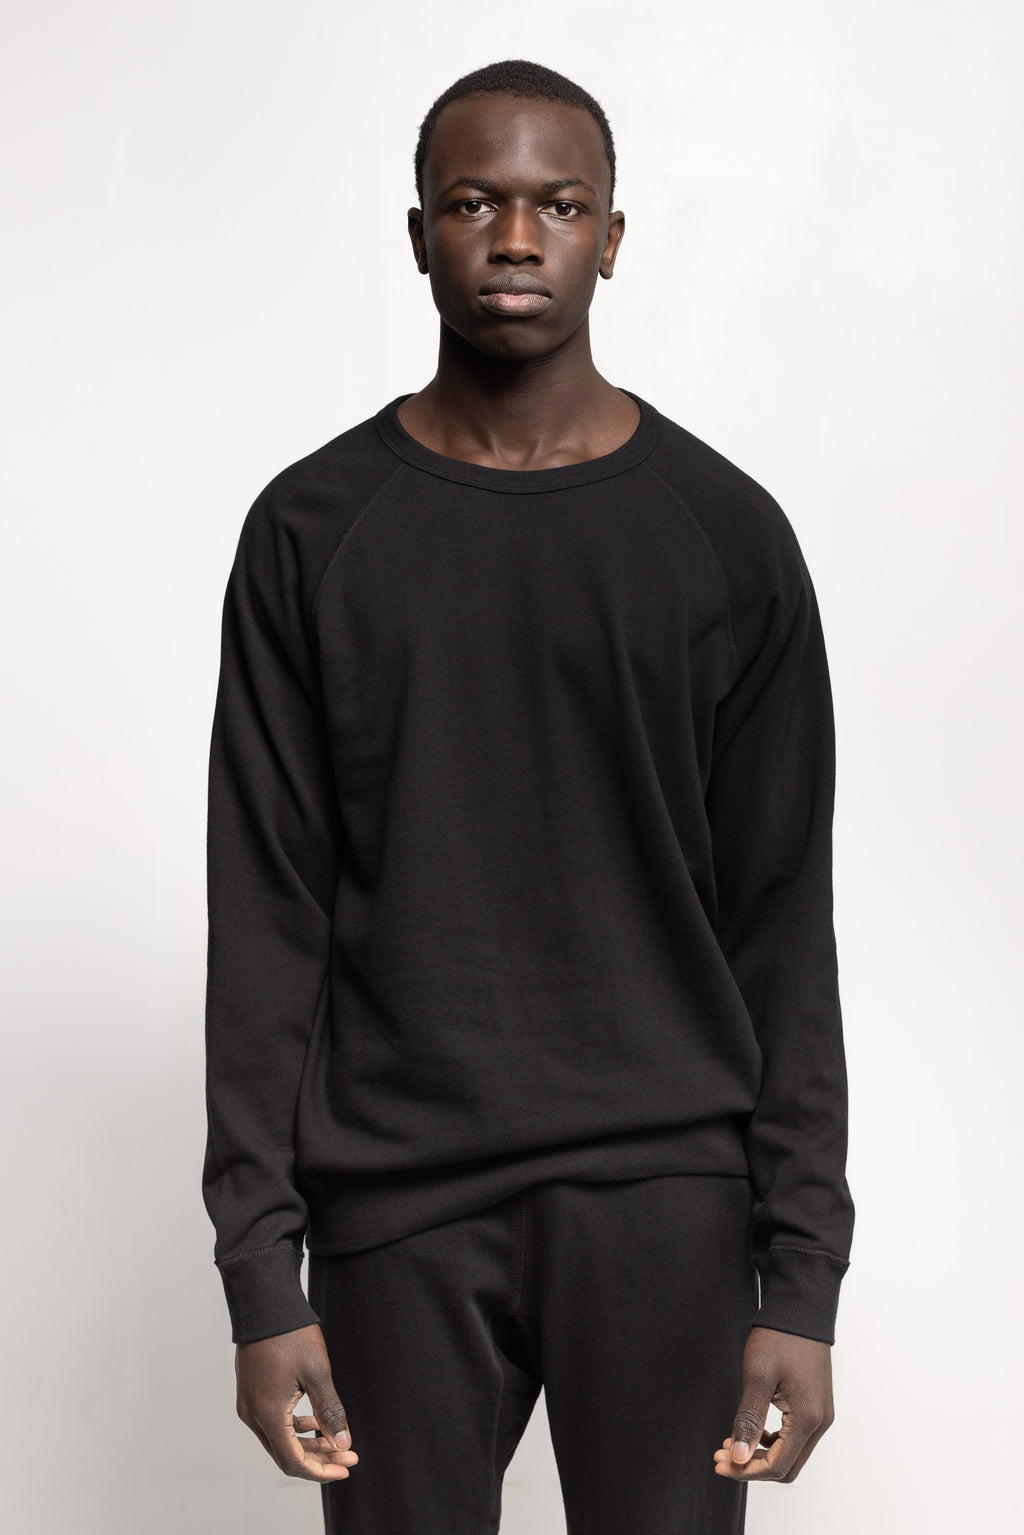 NS2117A-1 250g French Terry Long Sleeve Crew in Black 01